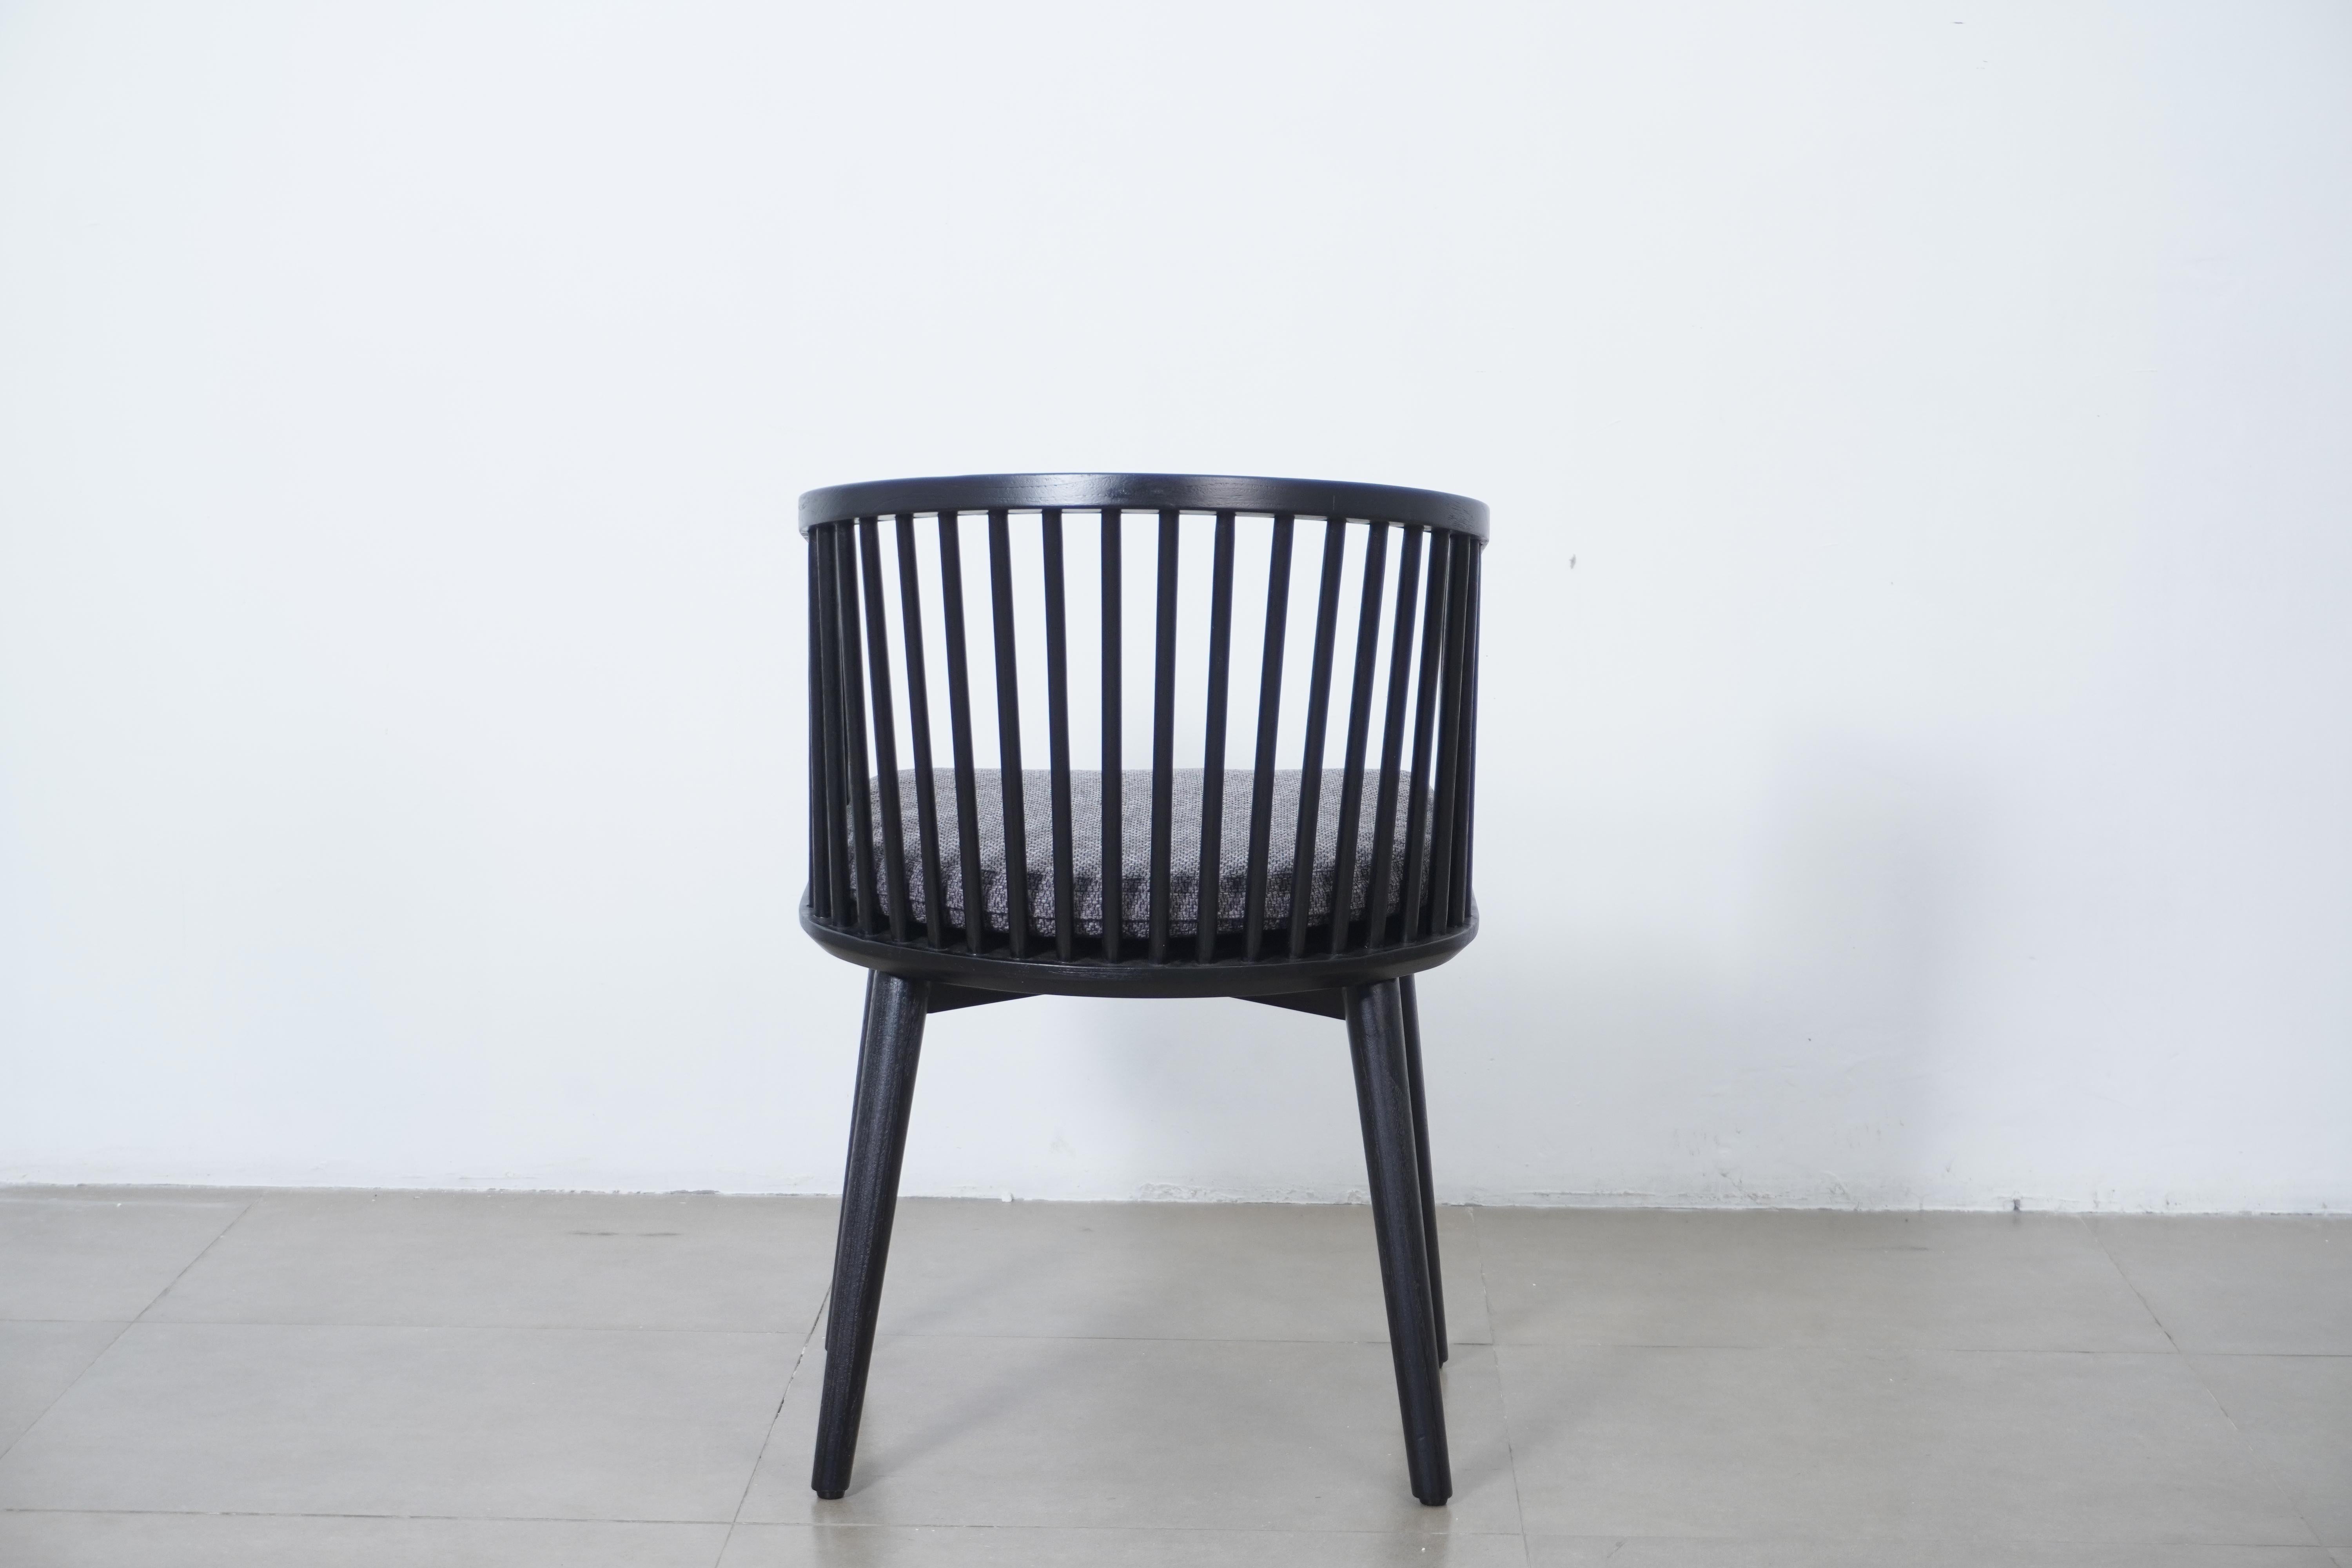 Javanese Modern Danish Peasant Dining Chair, Teak in Black Finish. Set of 6 chairs For Sale